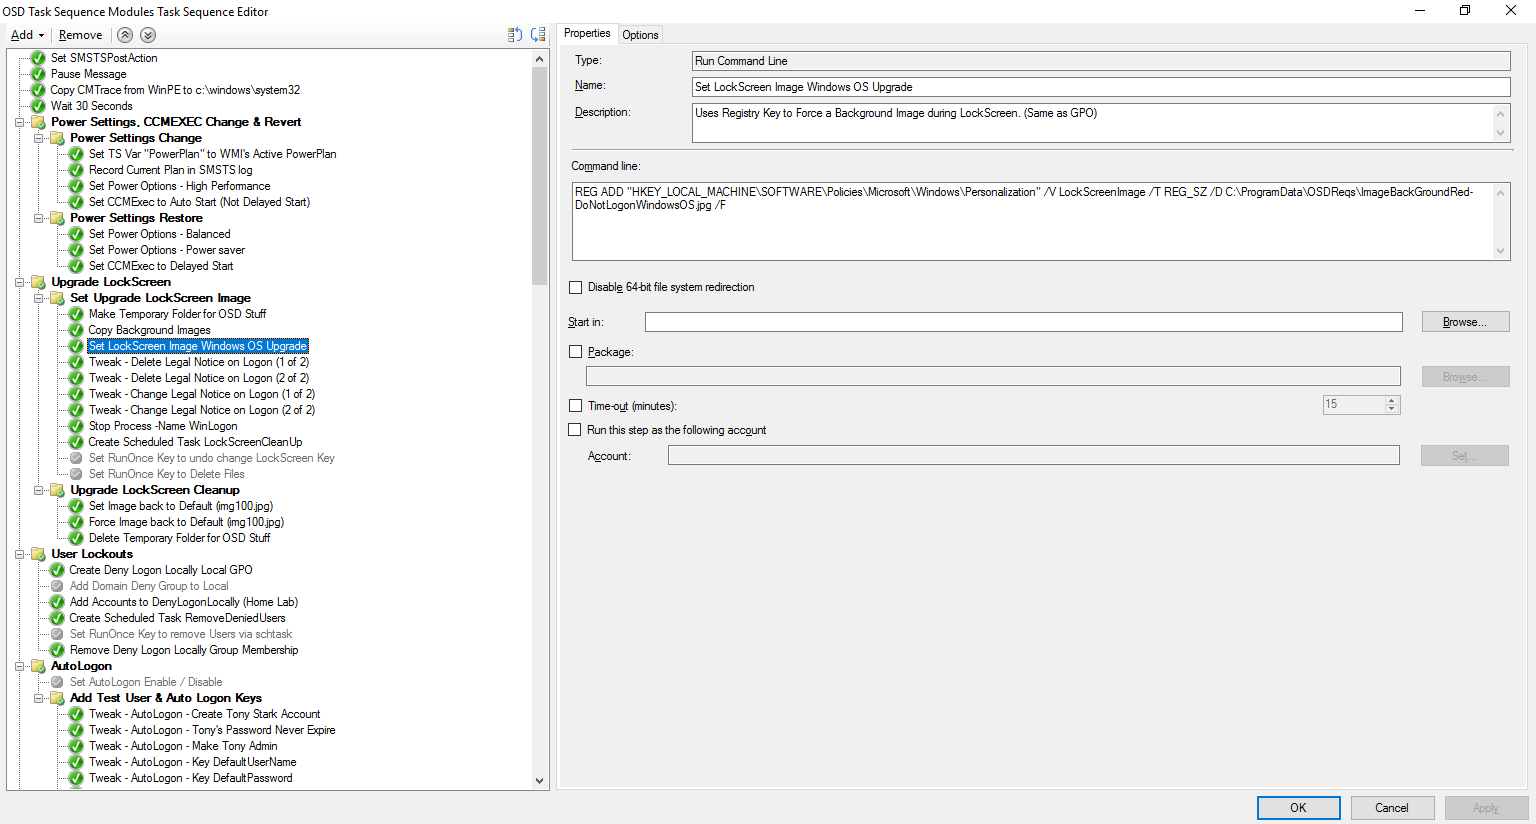 Screen grab from properties panel on Task Manager Sequence.